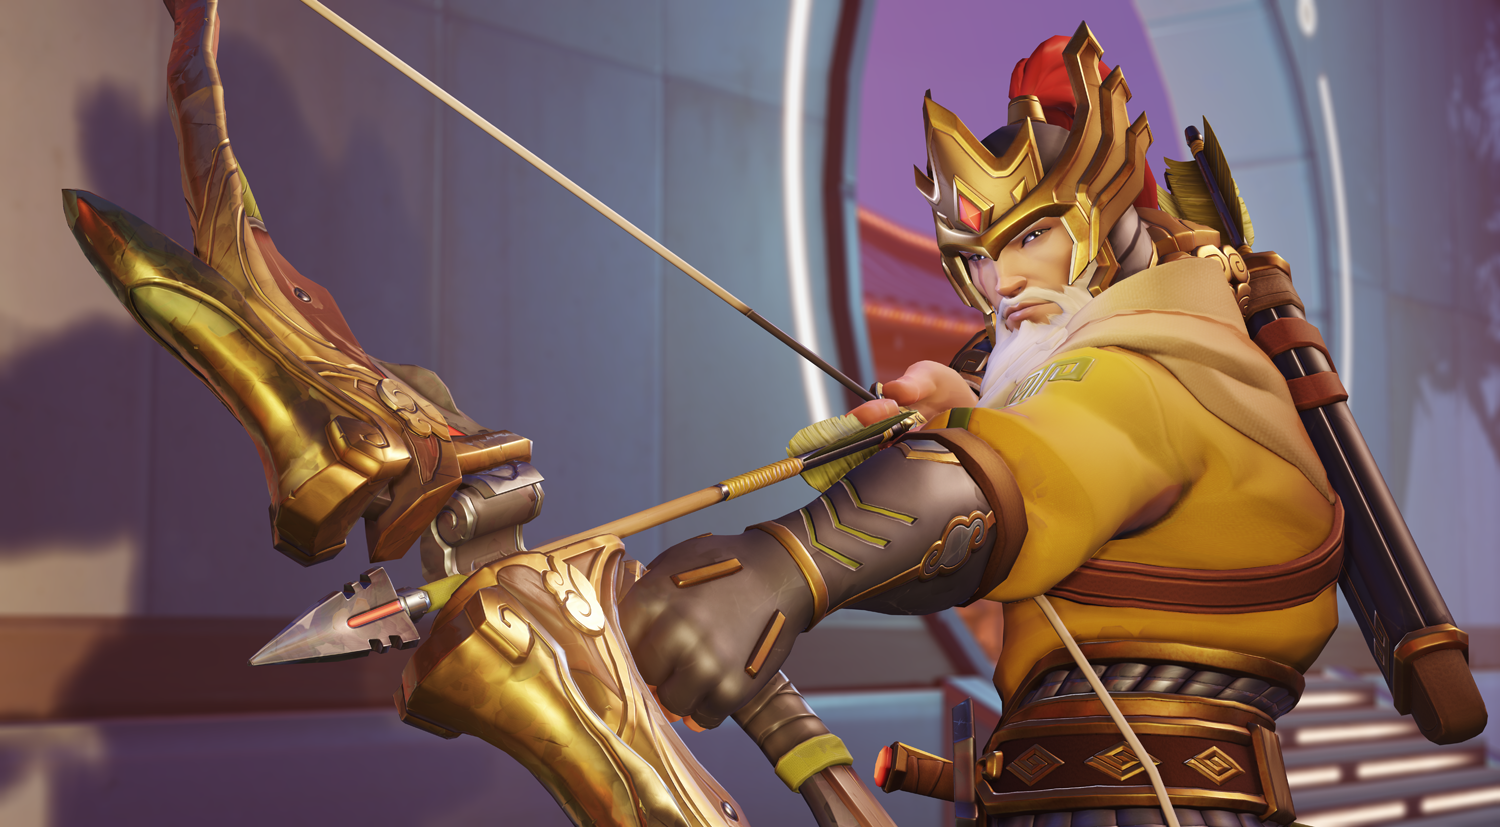 Overwatch Lunar New Year Skins Reveal Year of the Pig | Collider1500 x 827